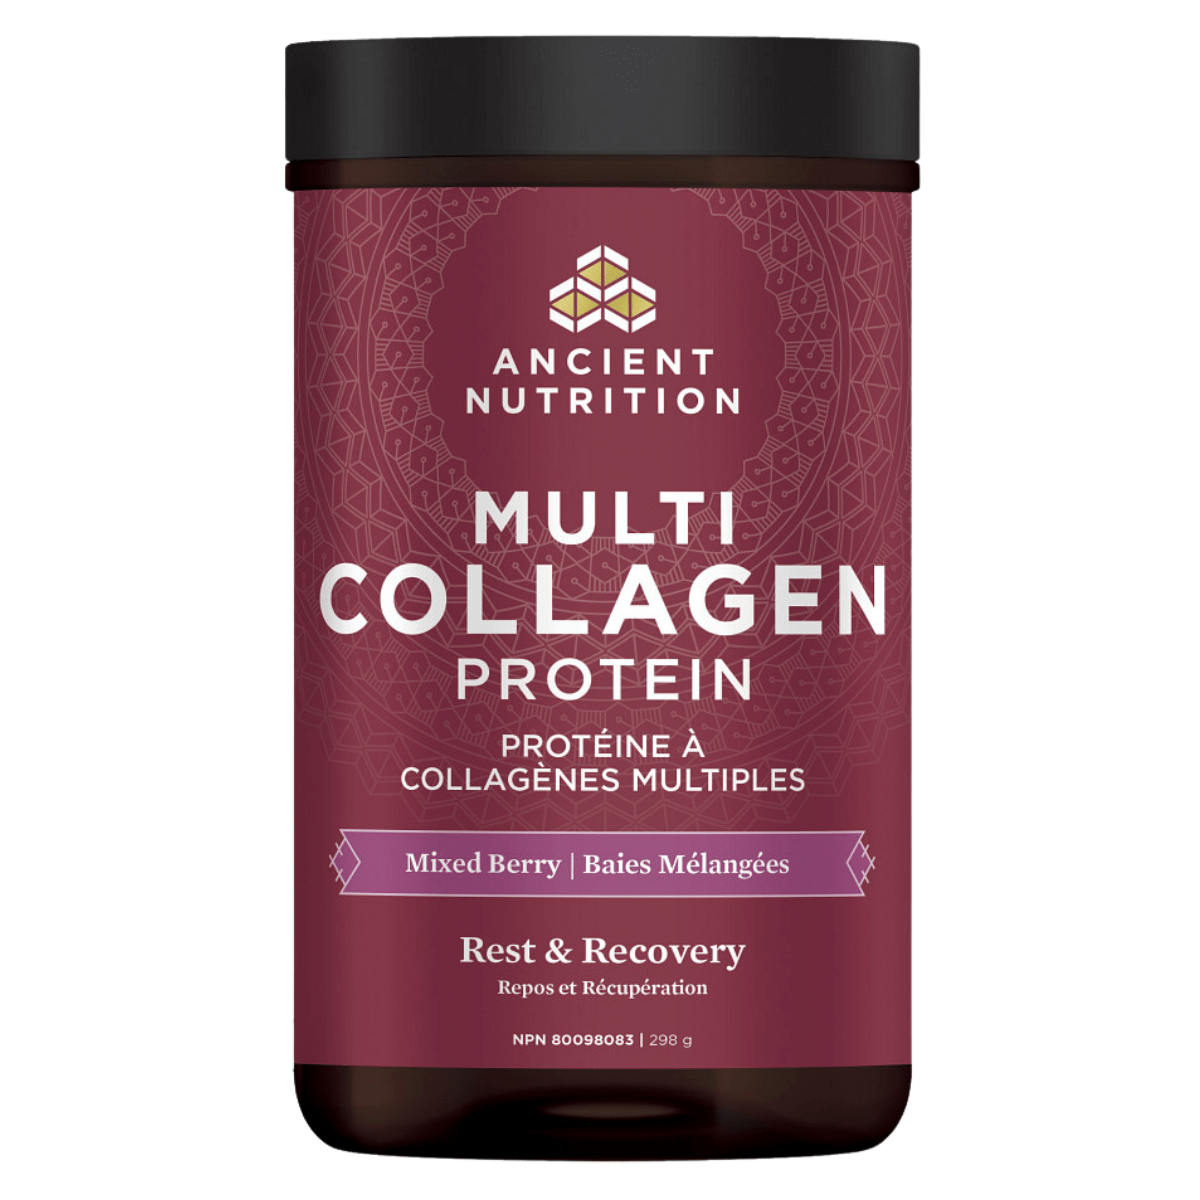 Ancient Nutrition Multi Collagen Protein Rest & Recovery Mixed Berry, 298g